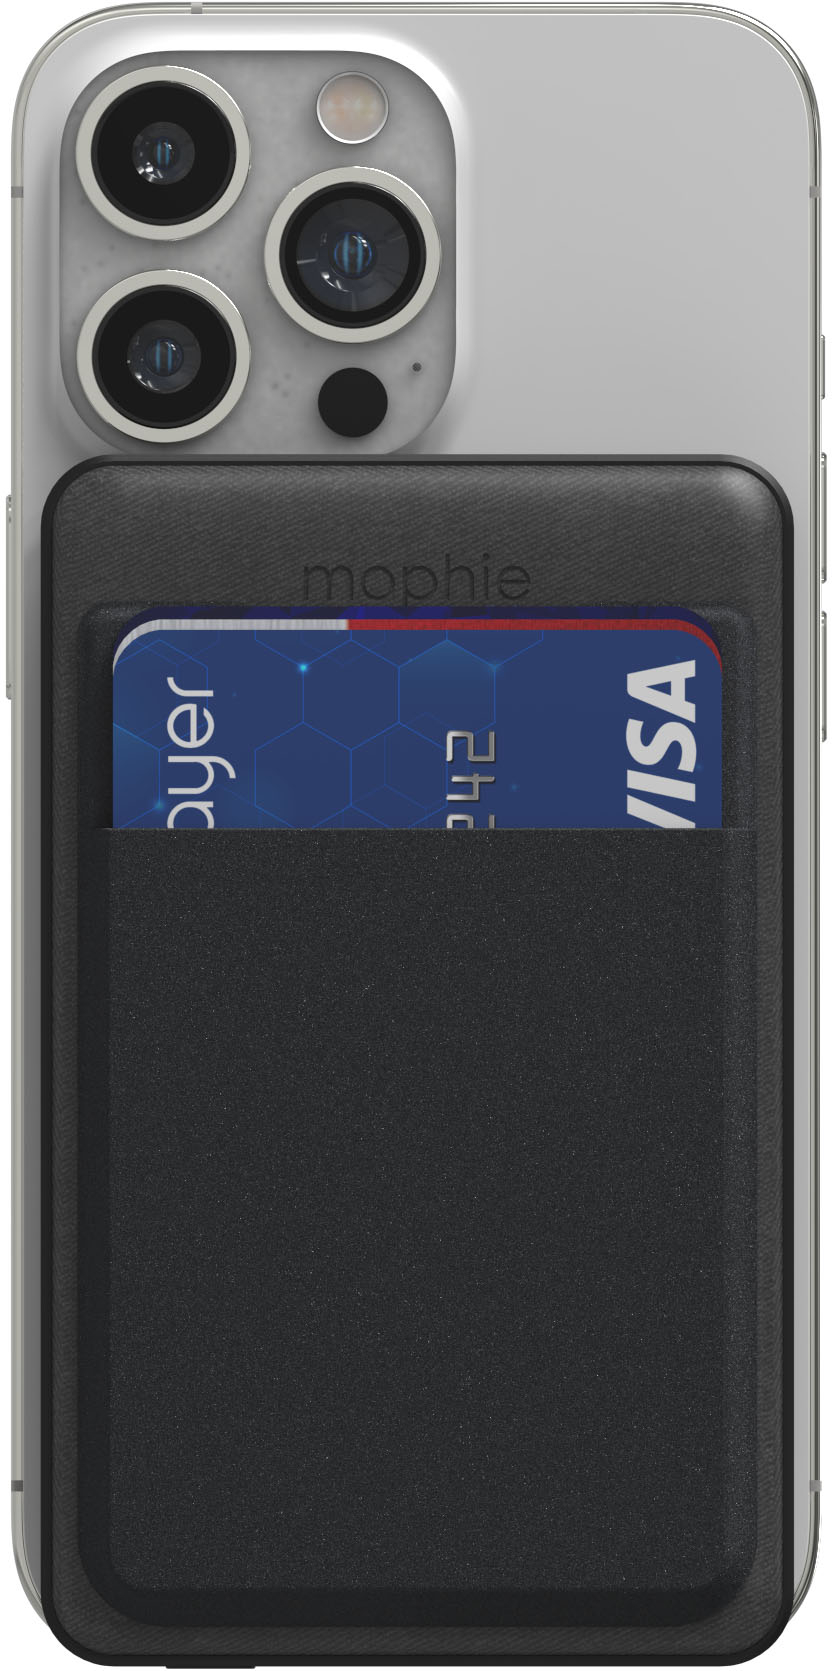 mophie - Snap+ Juice Pack Mini Wallet 5,000 mAh Portable Charger & Card Holder with MagSafe Compatibility - Black